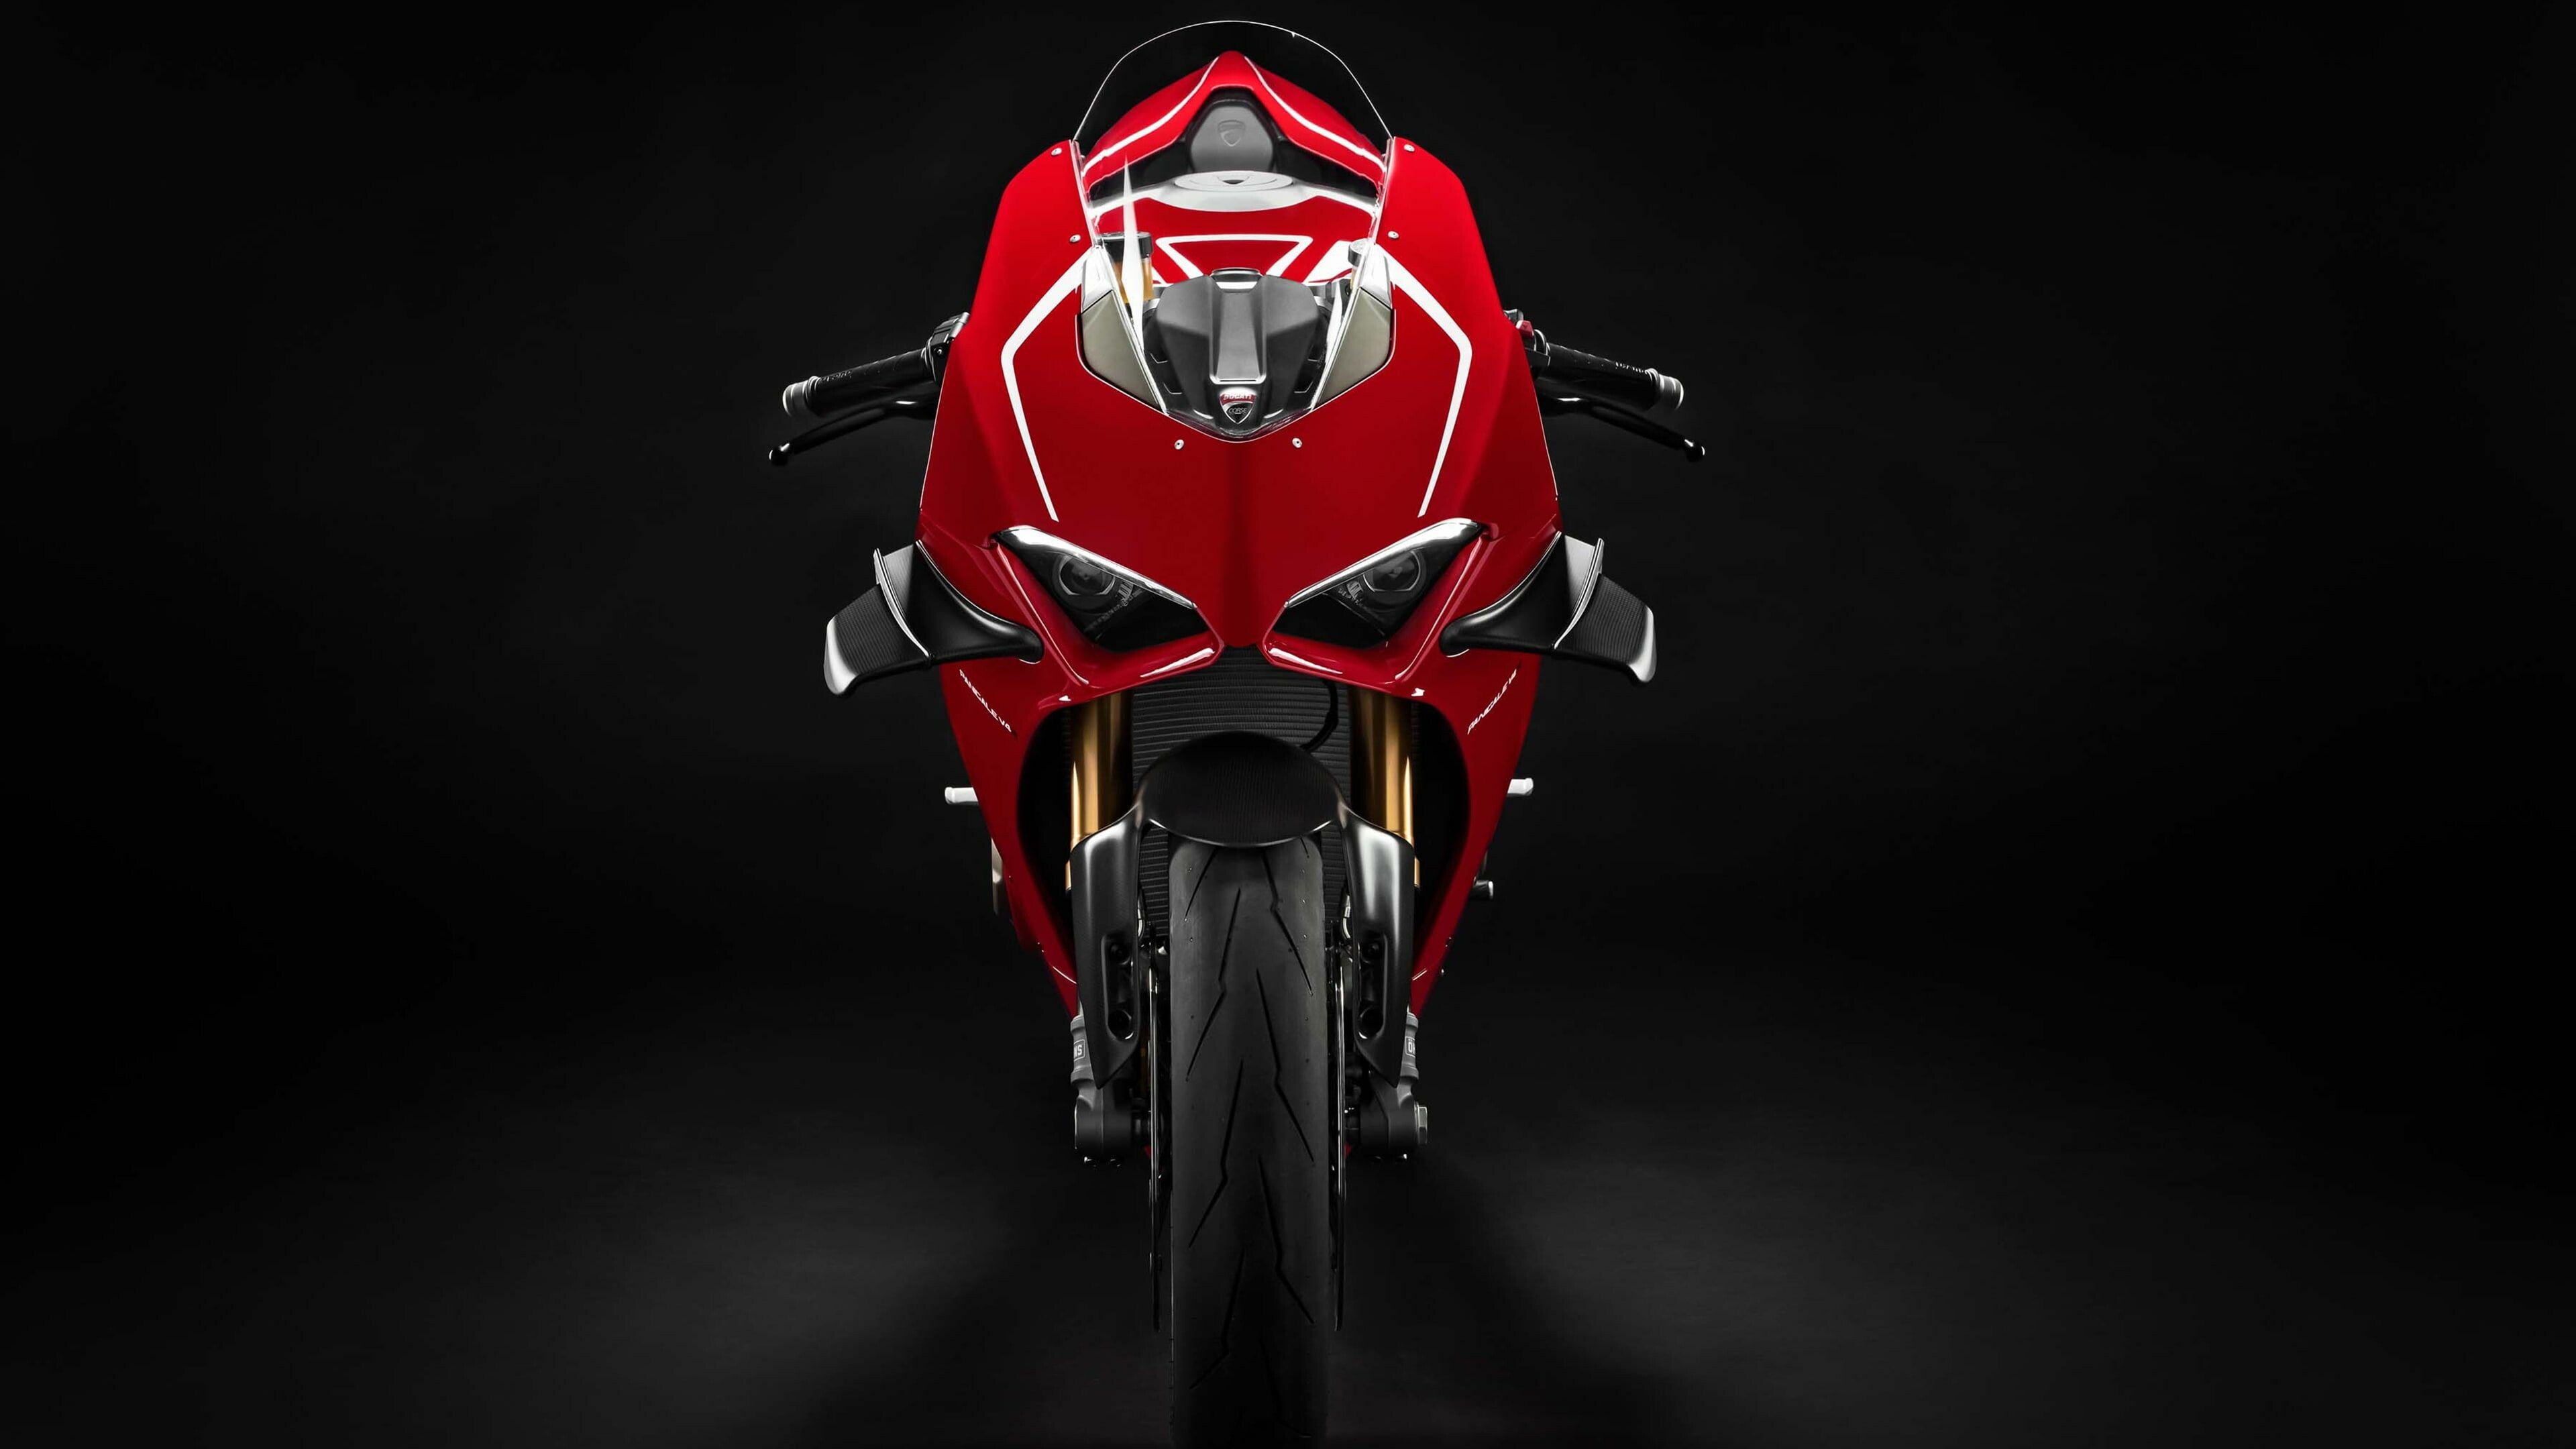 Ducati: Panigale V4 R, The successor to the V-twin engined 1299. 3840x2160 4K Background.